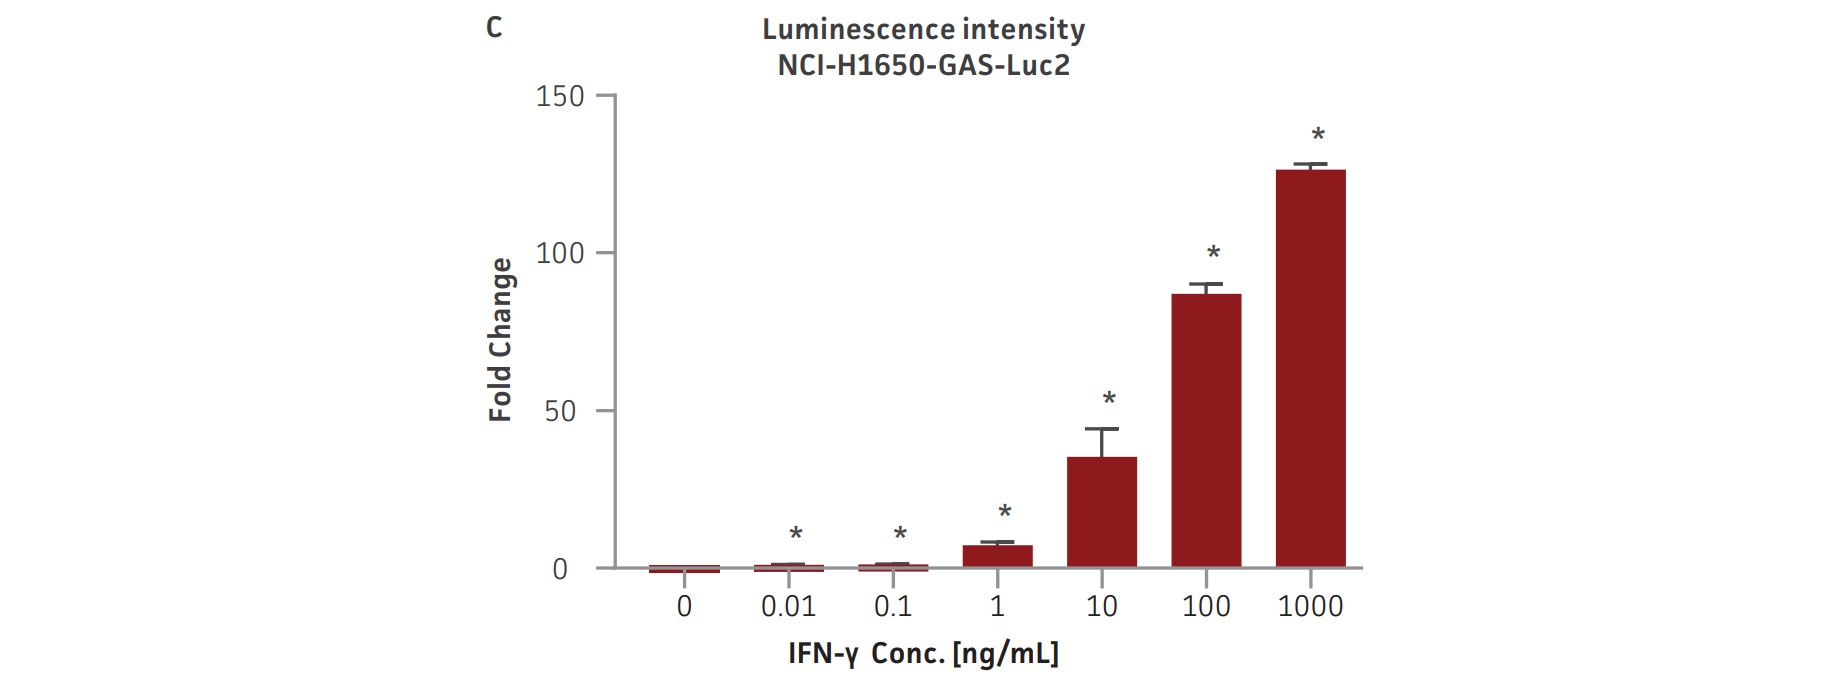 Evaluation of GAS-Luc2 cell lines via IFN-γ stimulation